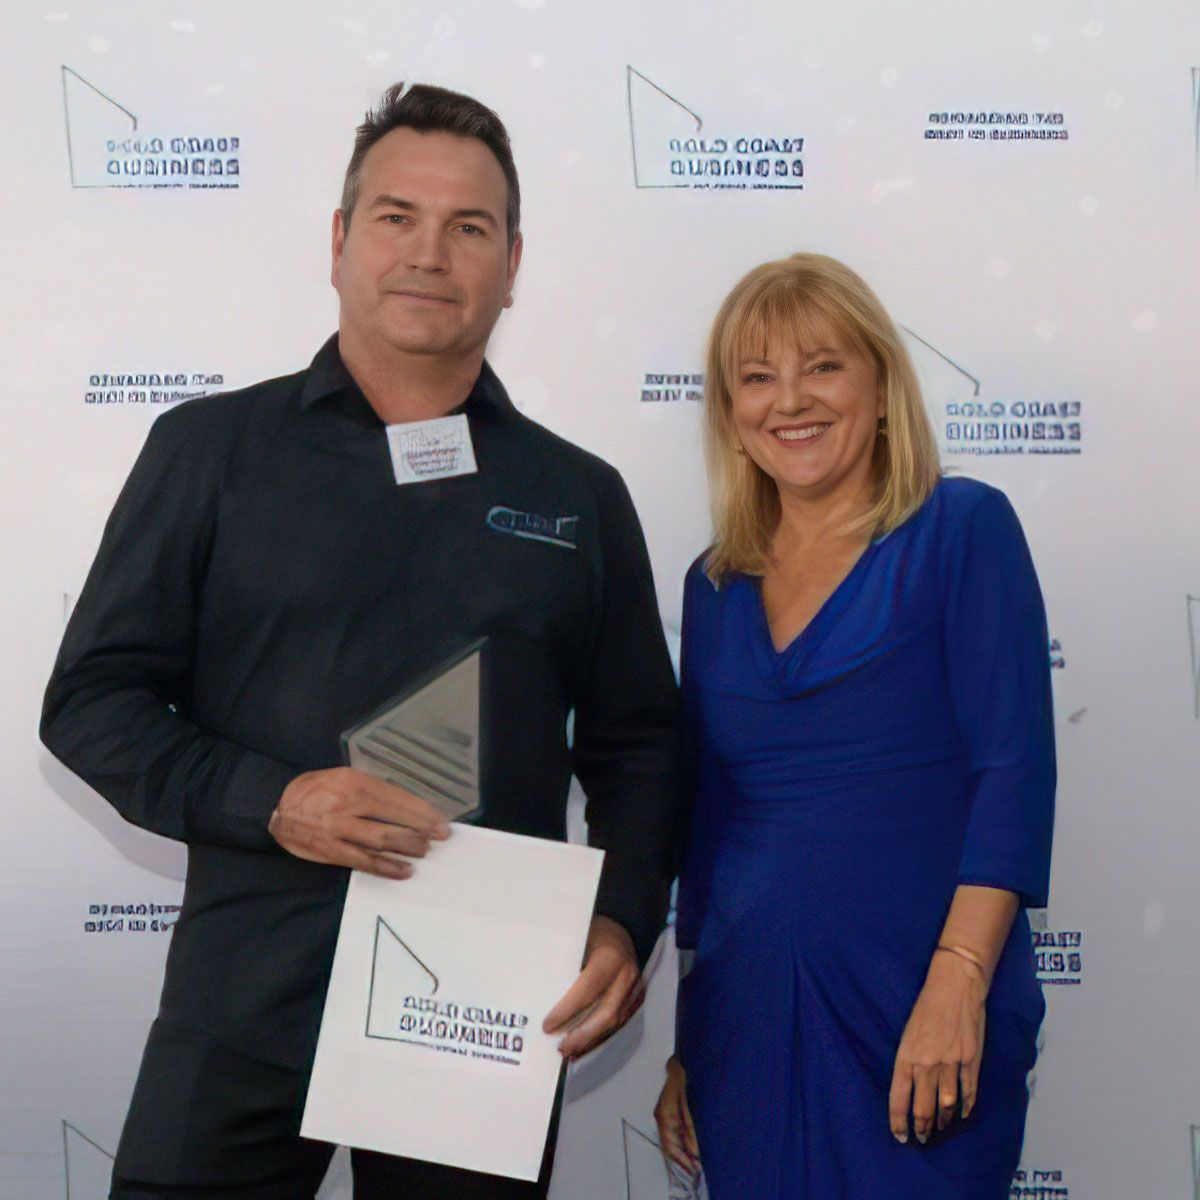 Brad accepting the Gold Coast Business Award for Marine Air Flow